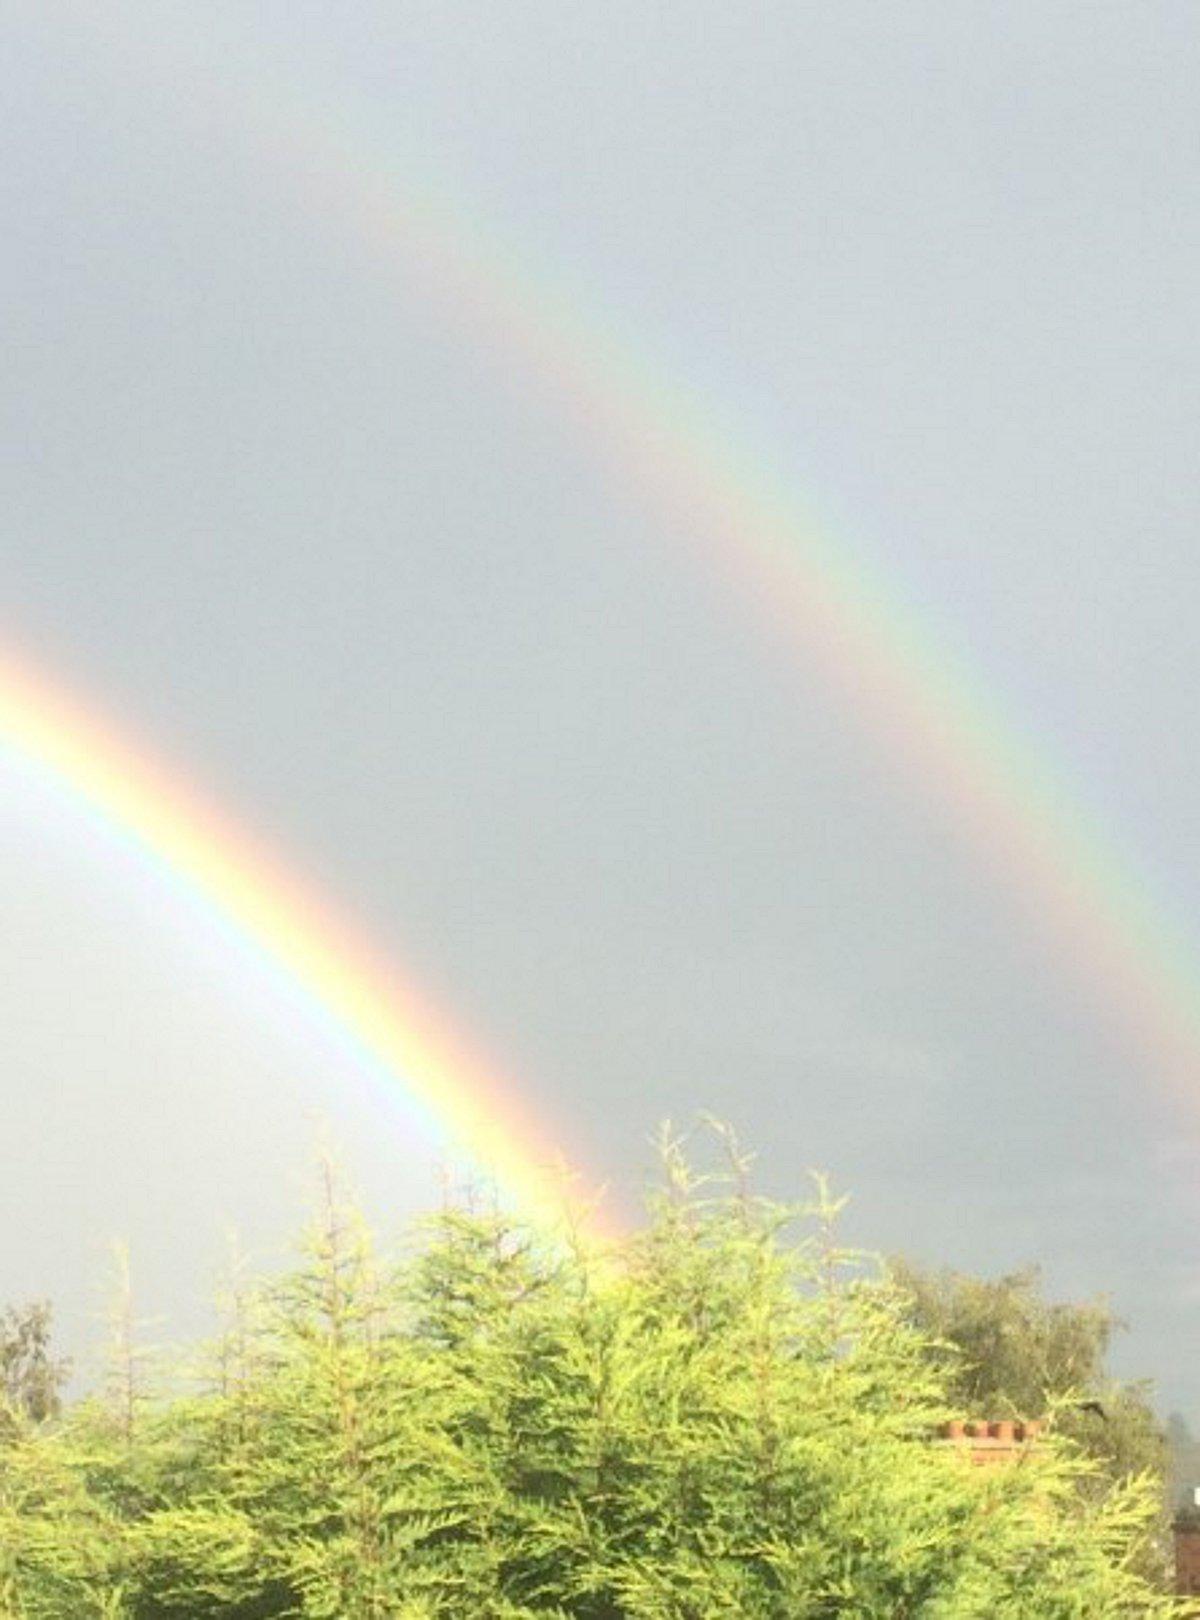 Kayleigh Magee's picture of a double rainbow in Chalfont St Peter